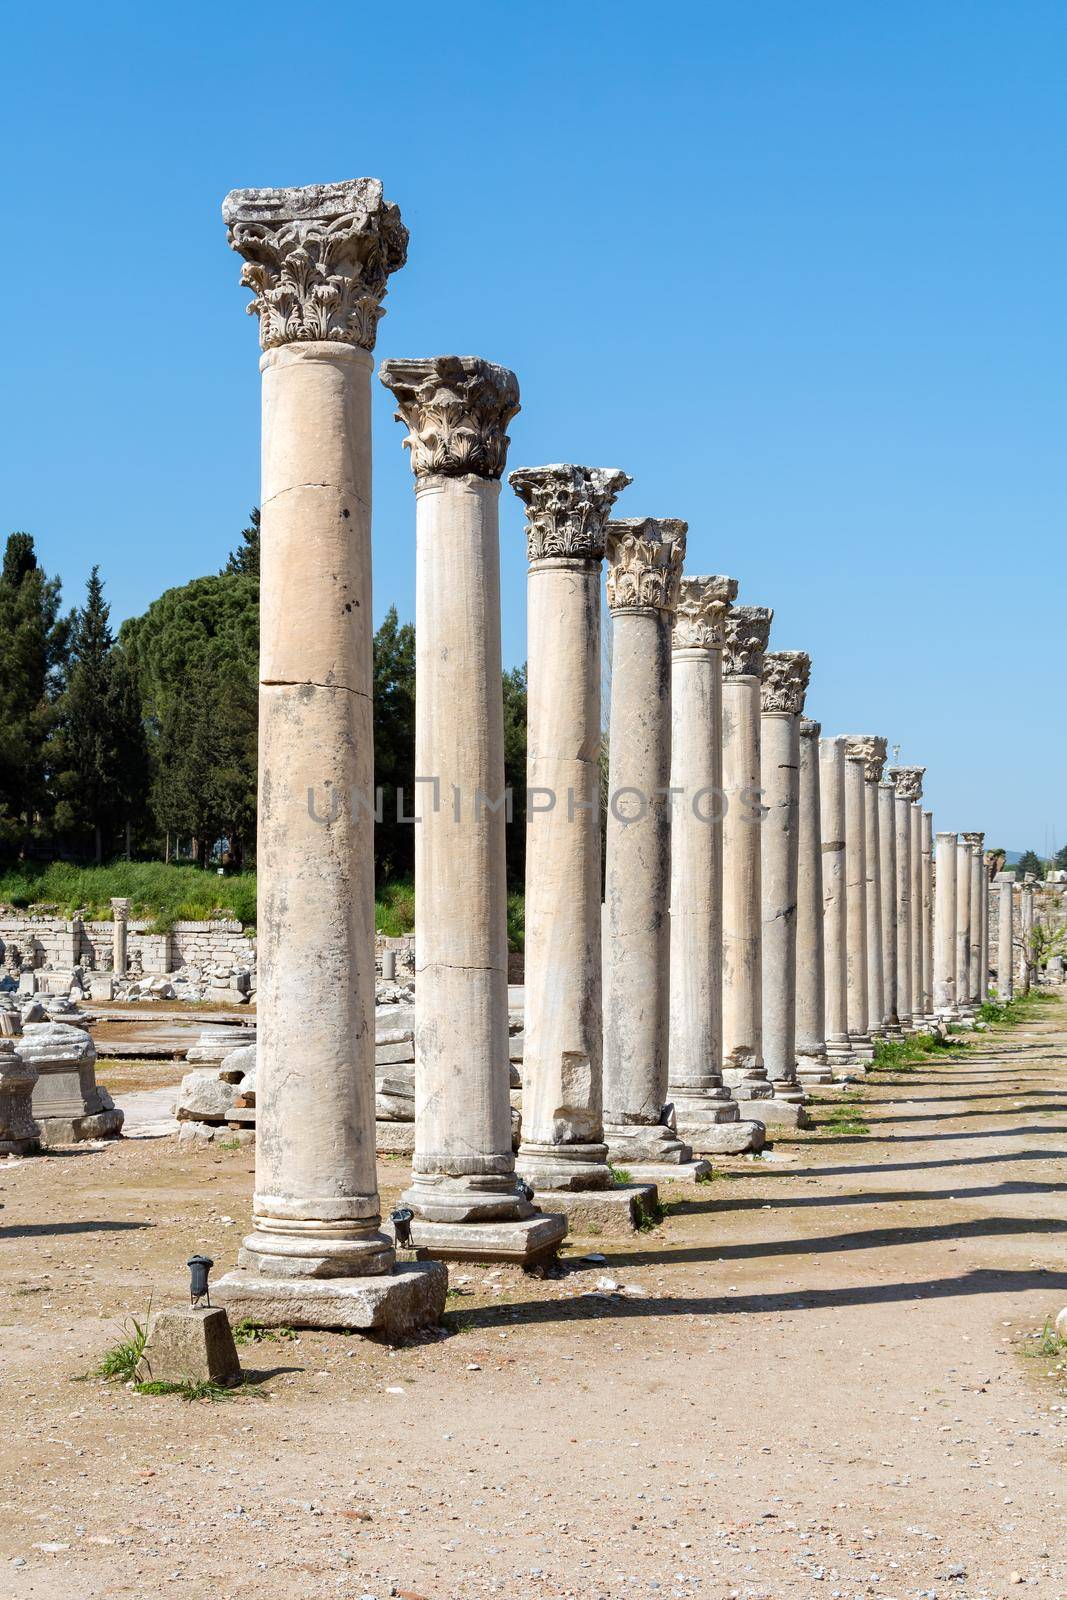 Ancient ruins in Ephesus Turkey, Ephesus contains the ancient largest collection of Roman ruins in the eastern